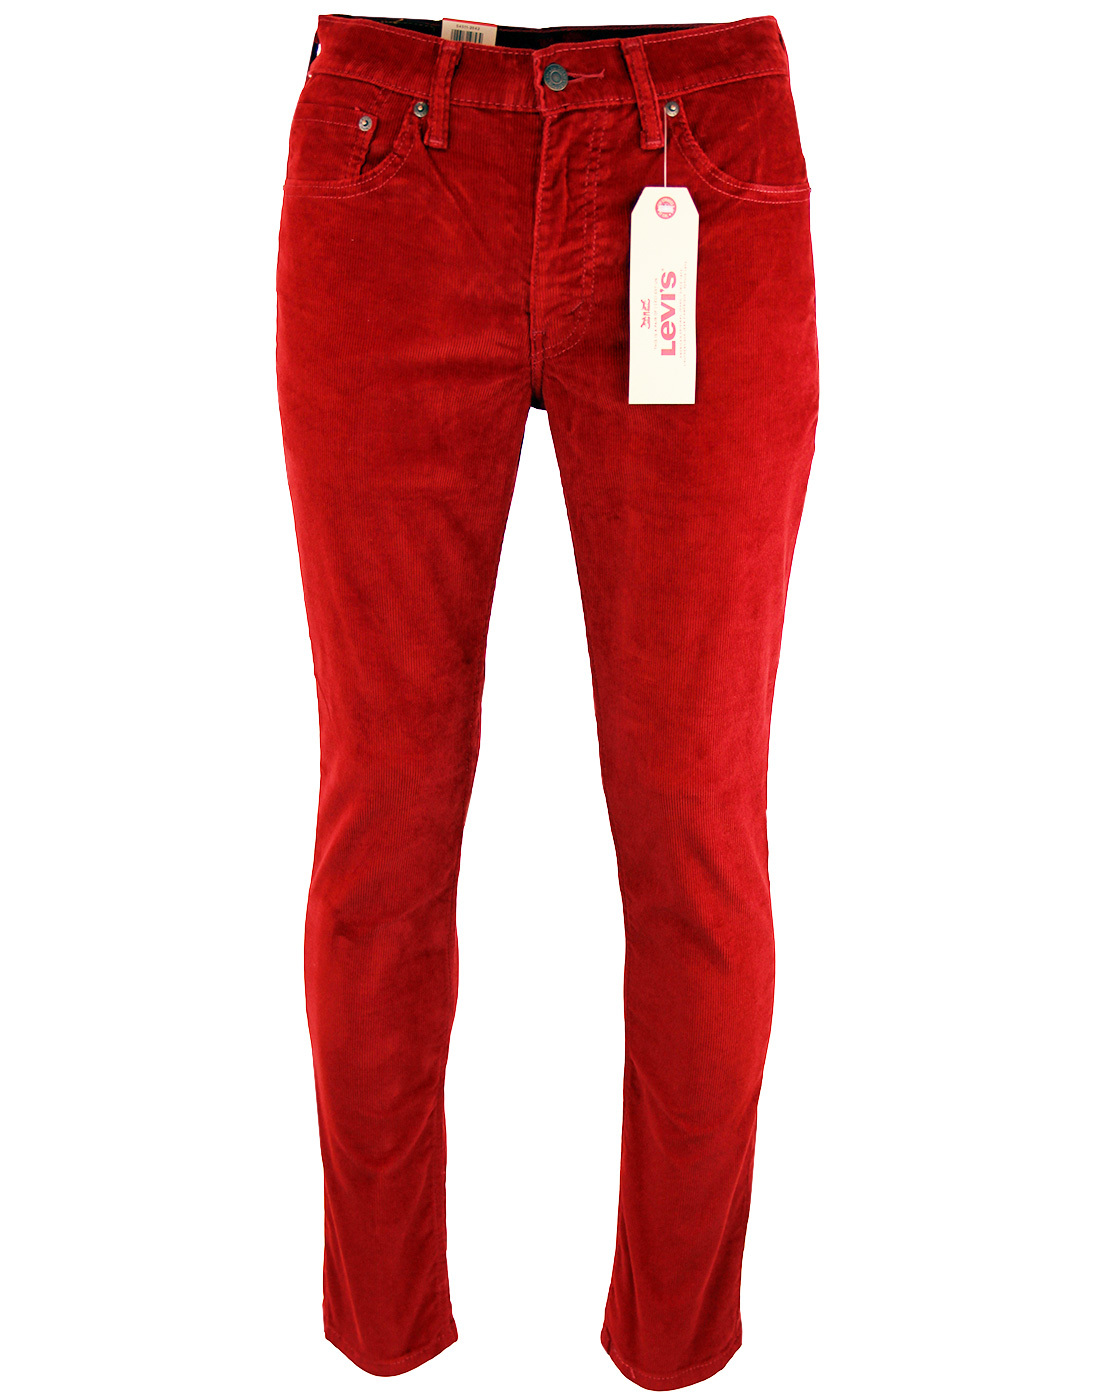 levi's 511 red